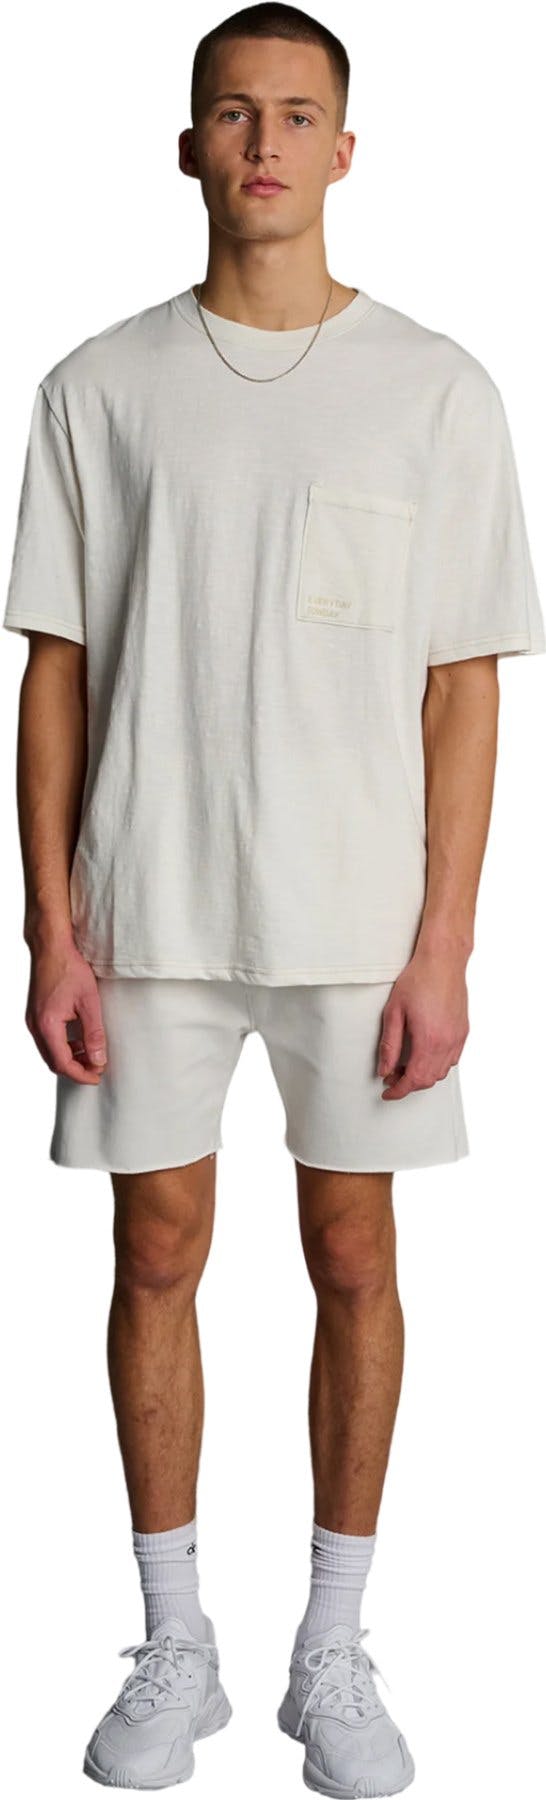 Product image for Comfort Shorts - Men's